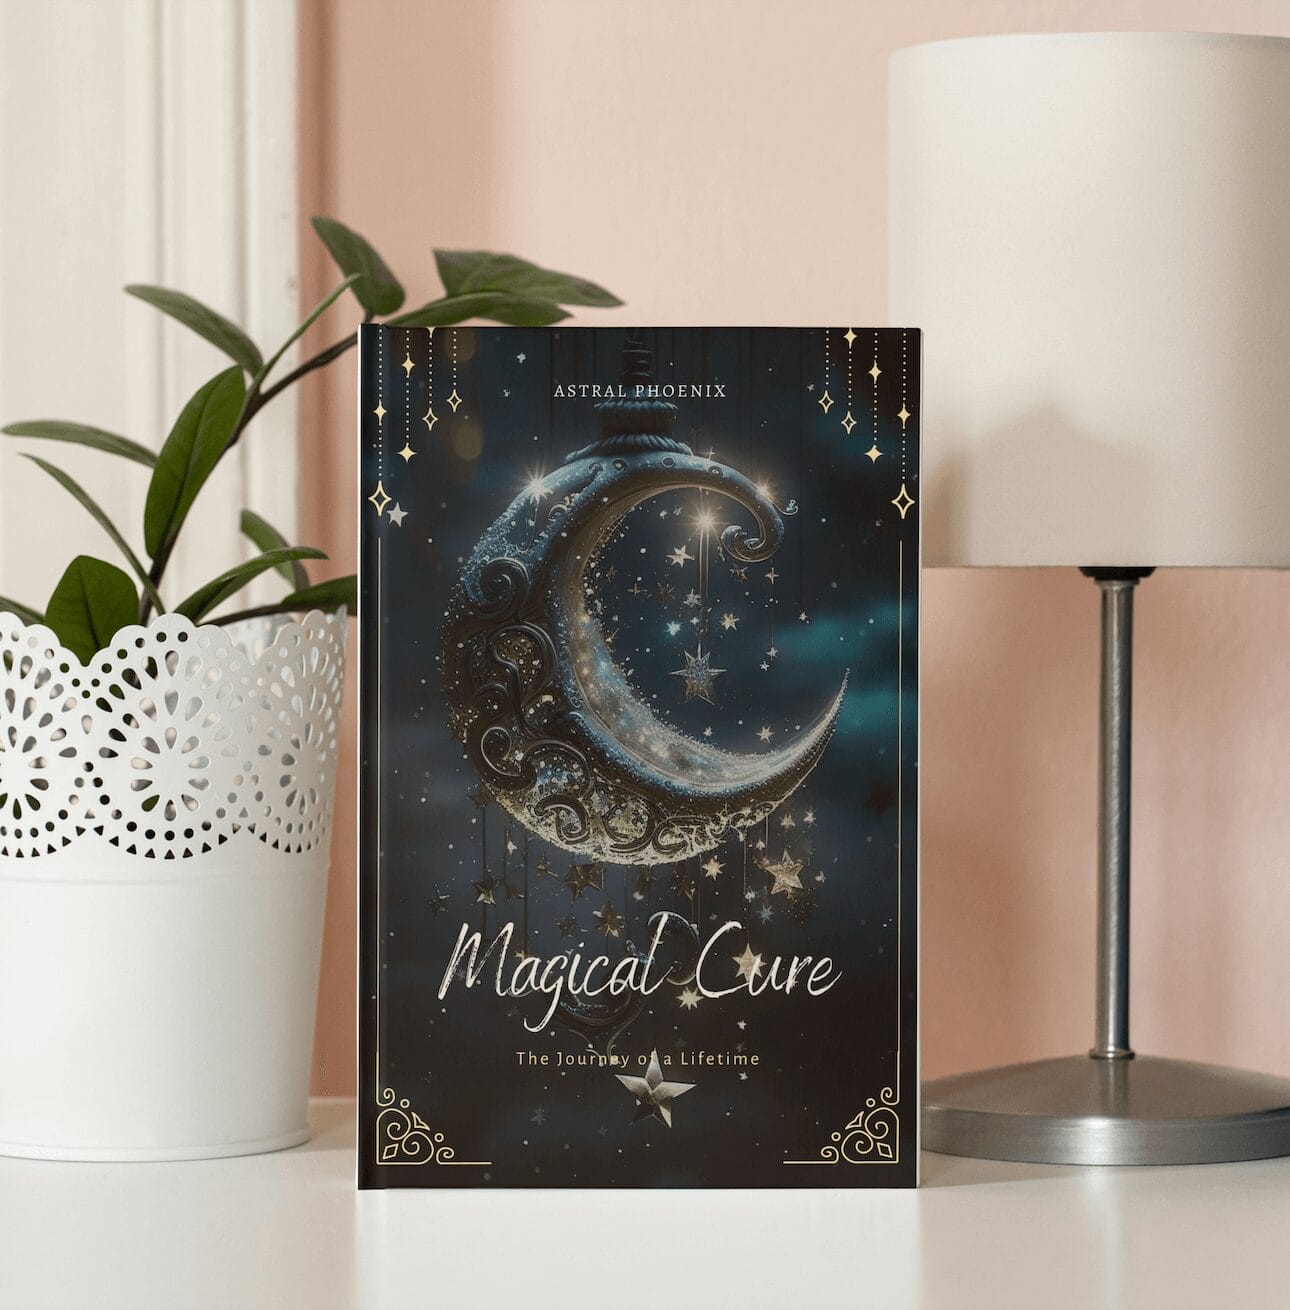 Magical Cure-Astral Phoenix-book-cover-mockup